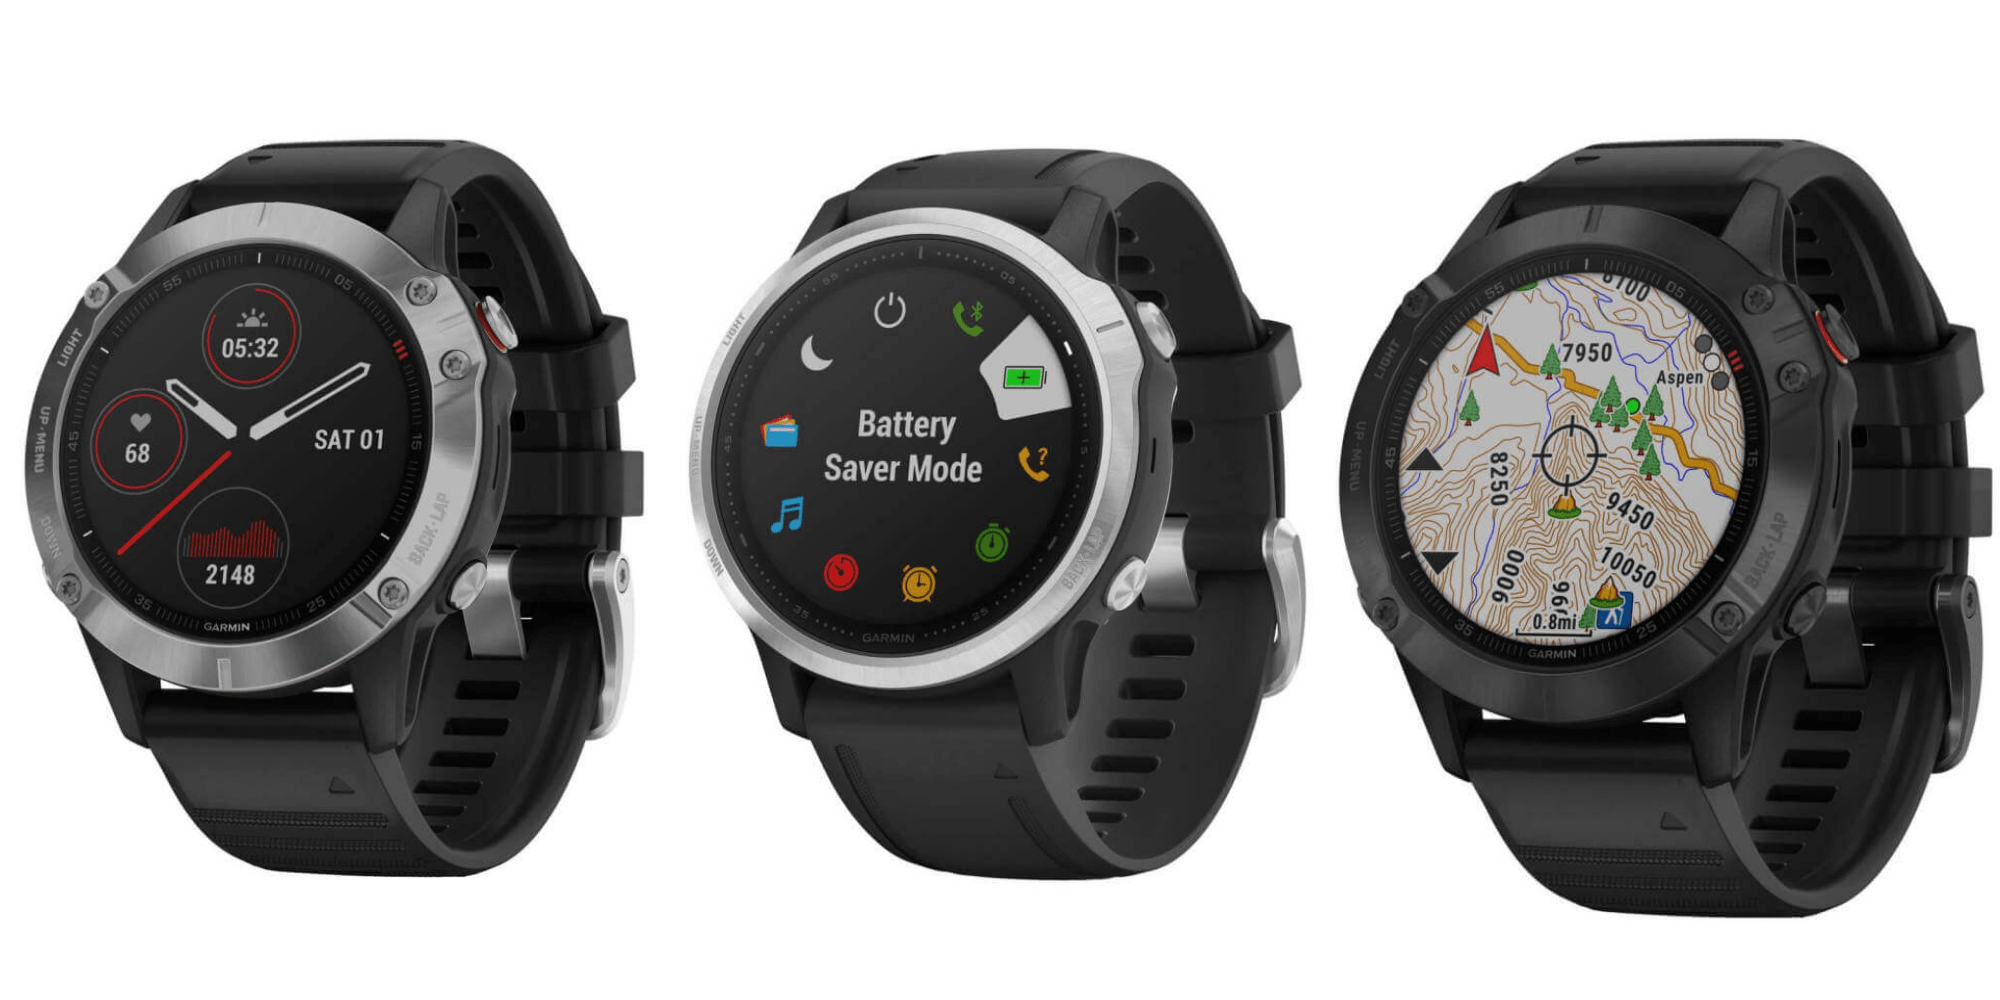 New Garmin Fenix 6, 6S and 6X images – detailed product renders